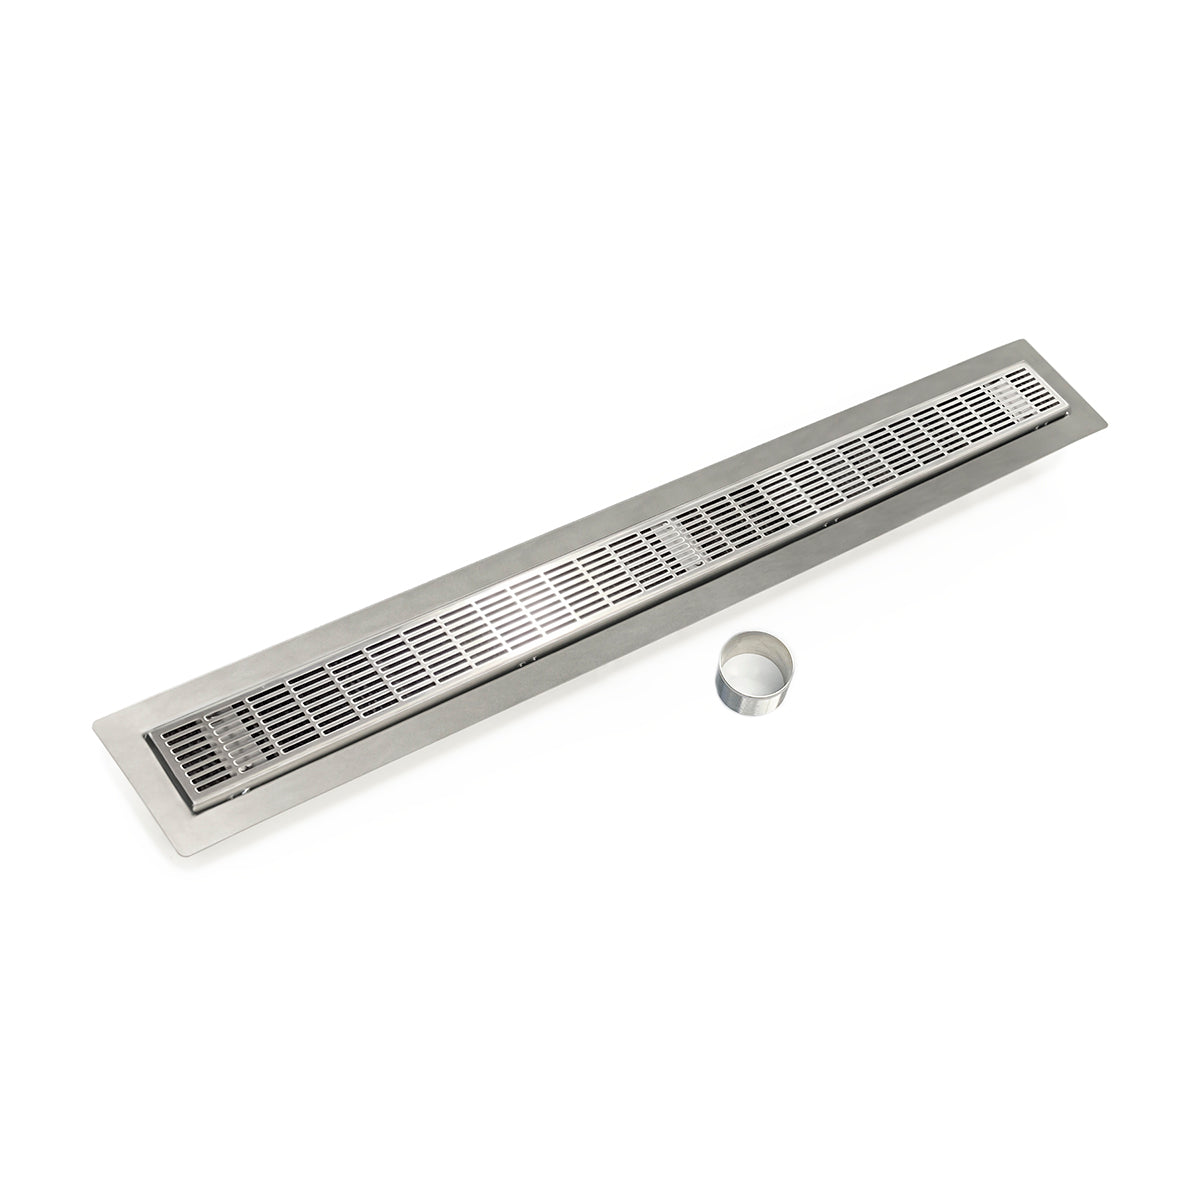 Infinity Drain 42" FCB Series Double Waterproofing Linear Drain Kit with 2 1/2" Perforated Slotted Grate